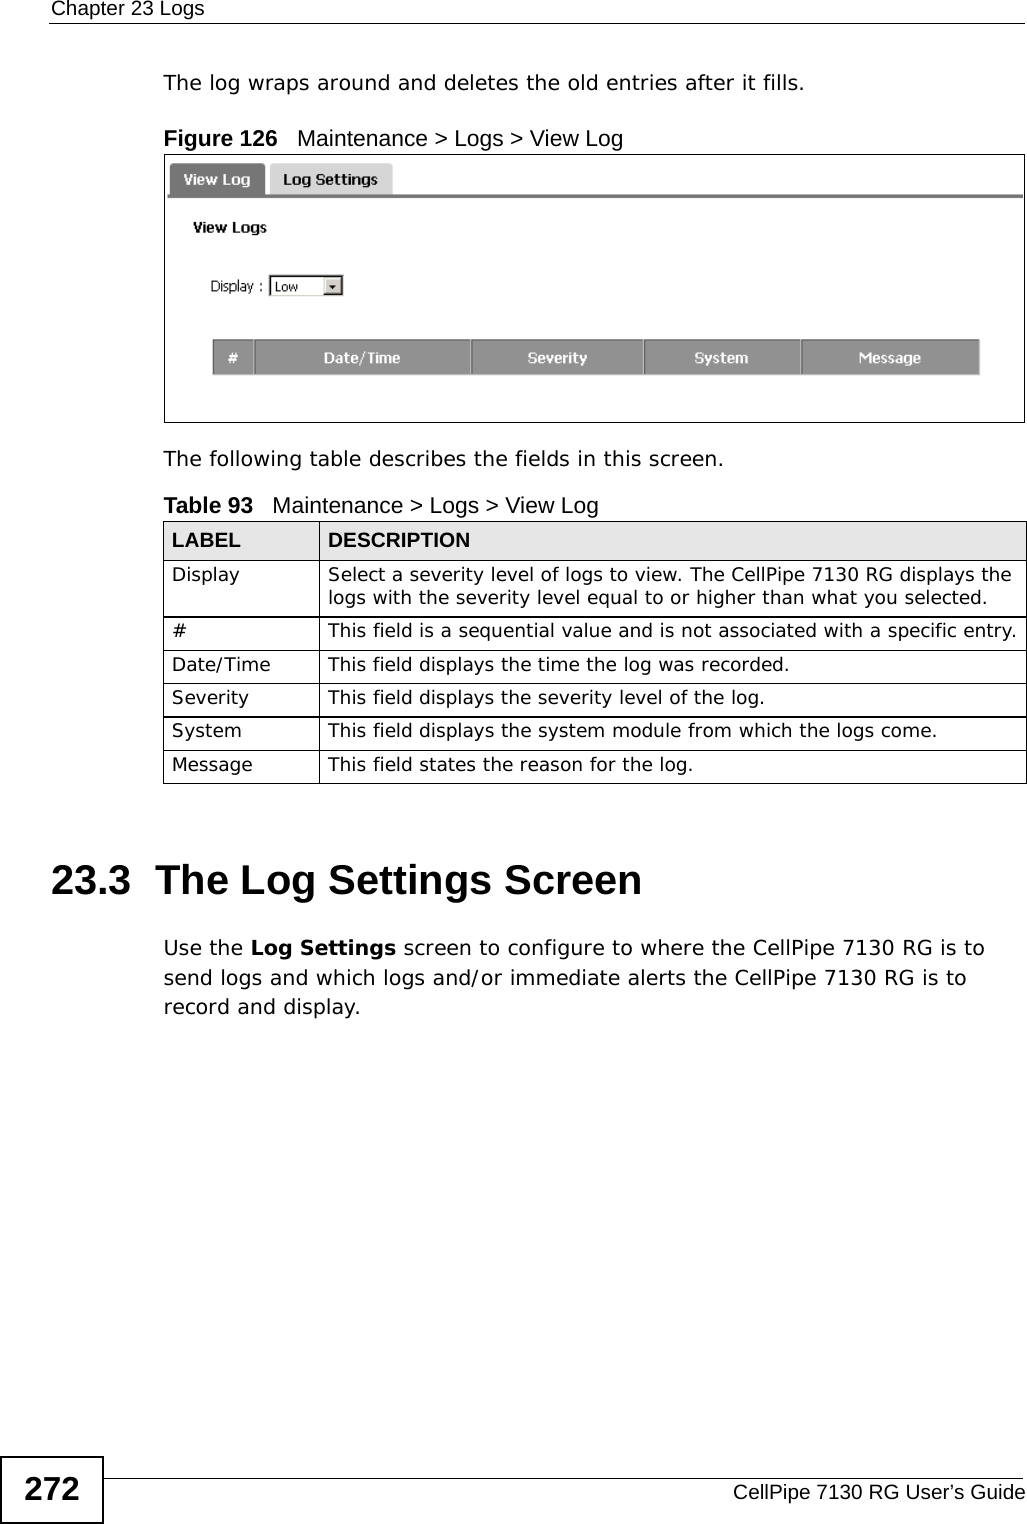 Chapter 23 LogsCellPipe 7130 RG User’s Guide272The log wraps around and deletes the old entries after it fills.Figure 126   Maintenance &gt; Logs &gt; View LogThe following table describes the fields in this screen.  23.3  The Log Settings ScreenUse the Log Settings screen to configure to where the CellPipe 7130 RG is to send logs and which logs and/or immediate alerts the CellPipe 7130 RG is to record and display.  Table 93   Maintenance &gt; Logs &gt; View LogLABEL DESCRIPTIONDisplay  Select a severity level of logs to view. The CellPipe 7130 RG displays the logs with the severity level equal to or higher than what you selected.#This field is a sequential value and is not associated with a specific entry.Date/Time  This field displays the time the log was recorded. Severity  This field displays the severity level of the log.System This field displays the system module from which the logs come.Message This field states the reason for the log.